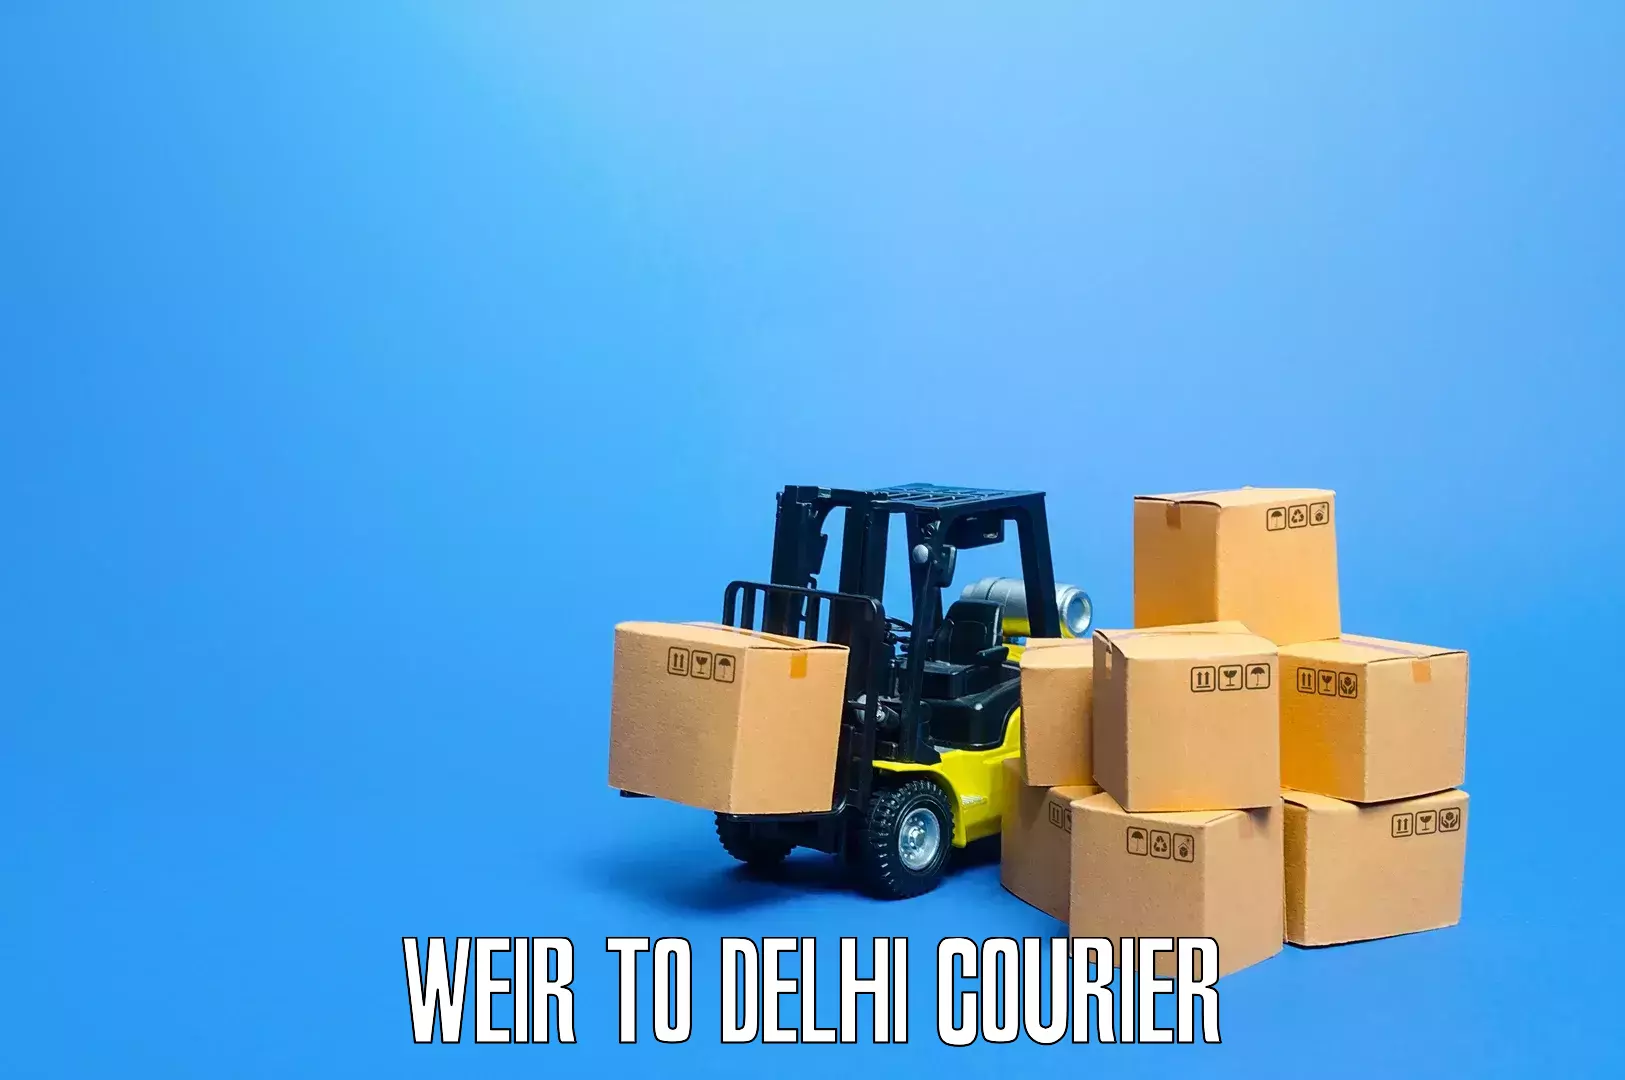 Furniture moving experts Weir to Lodhi Road